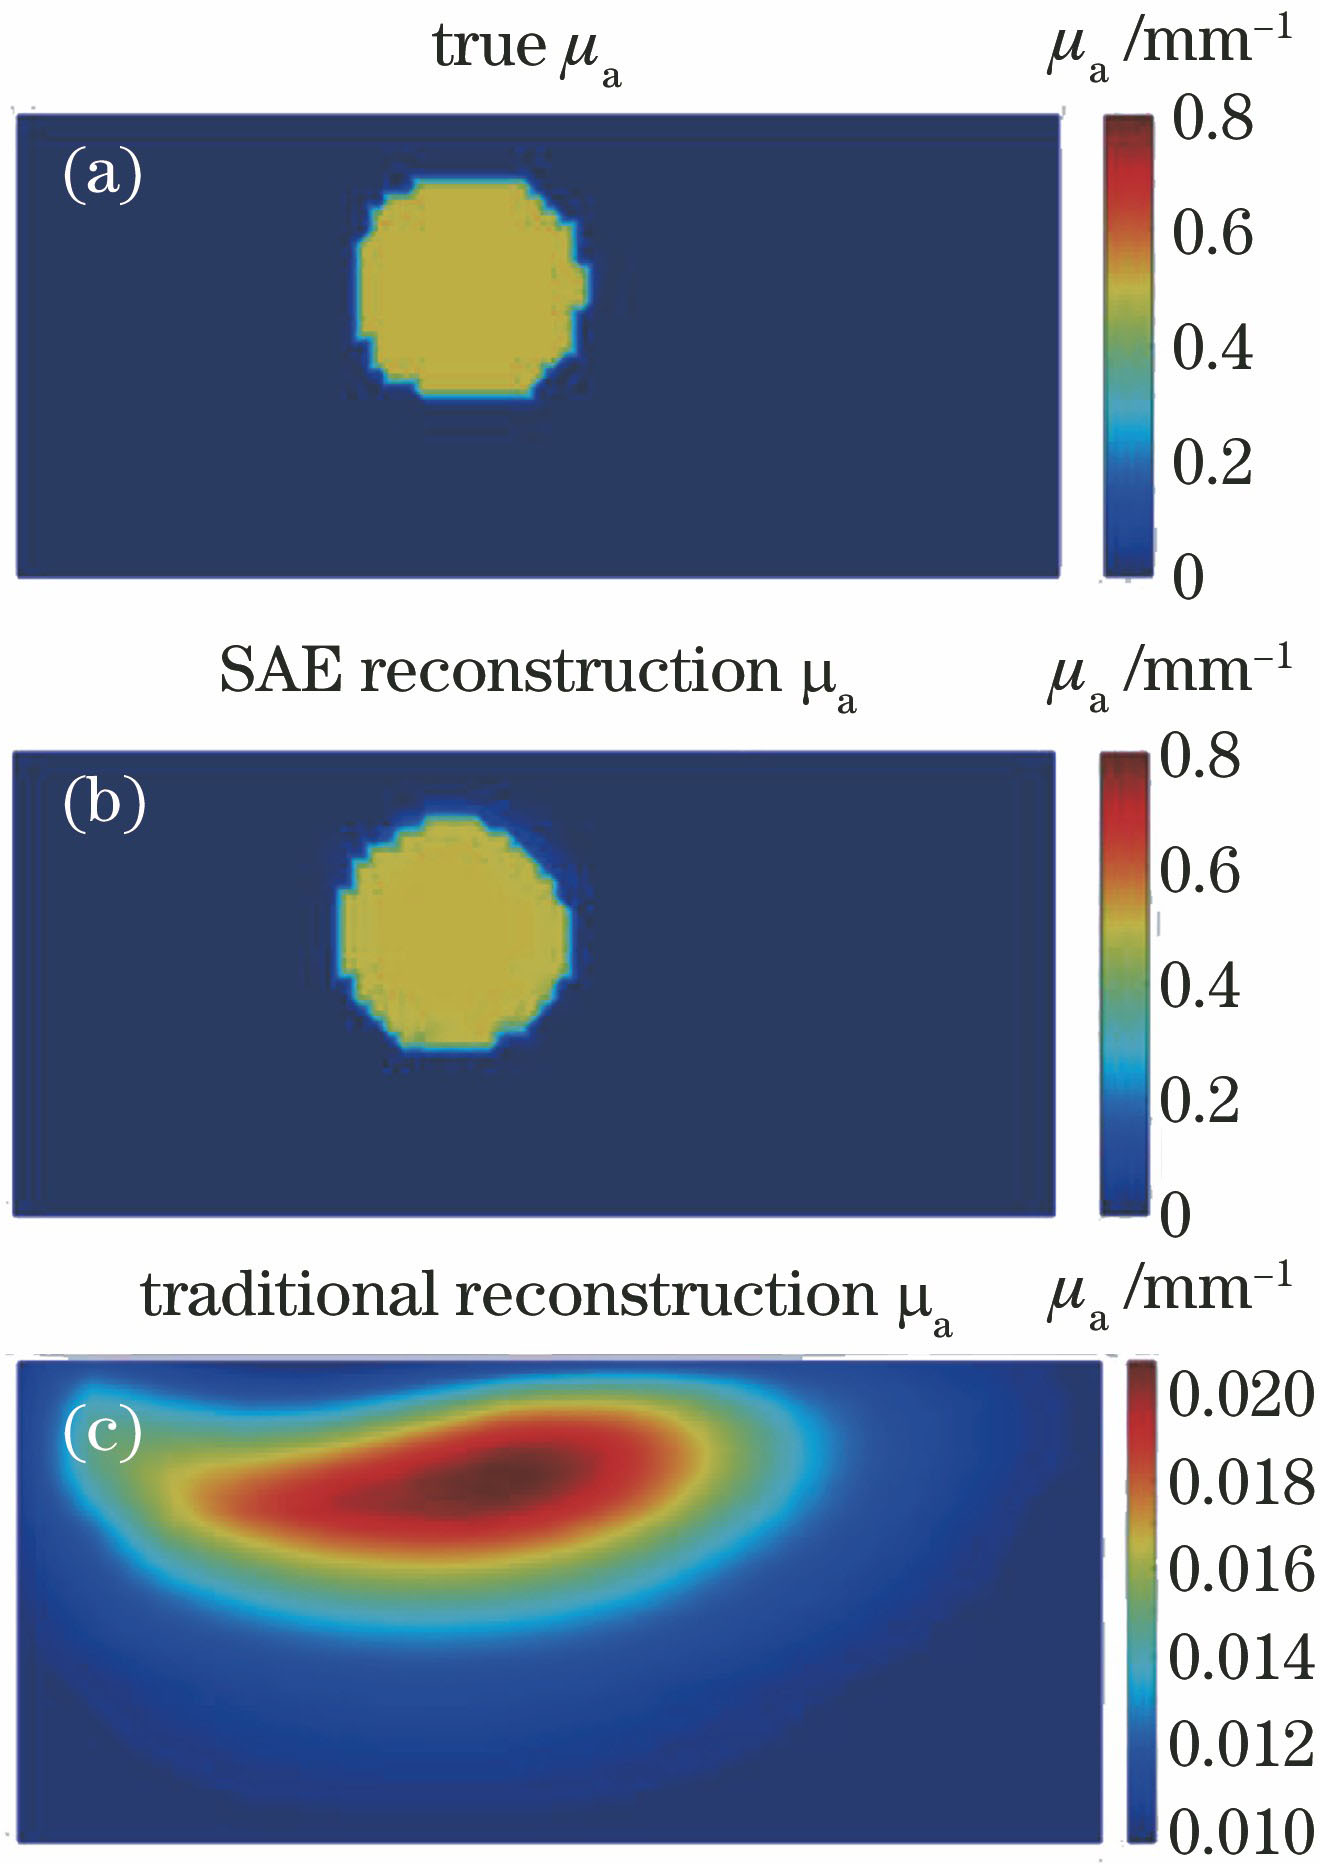 Comparison of deep learning reconstruction and traditional iterative reconstruction